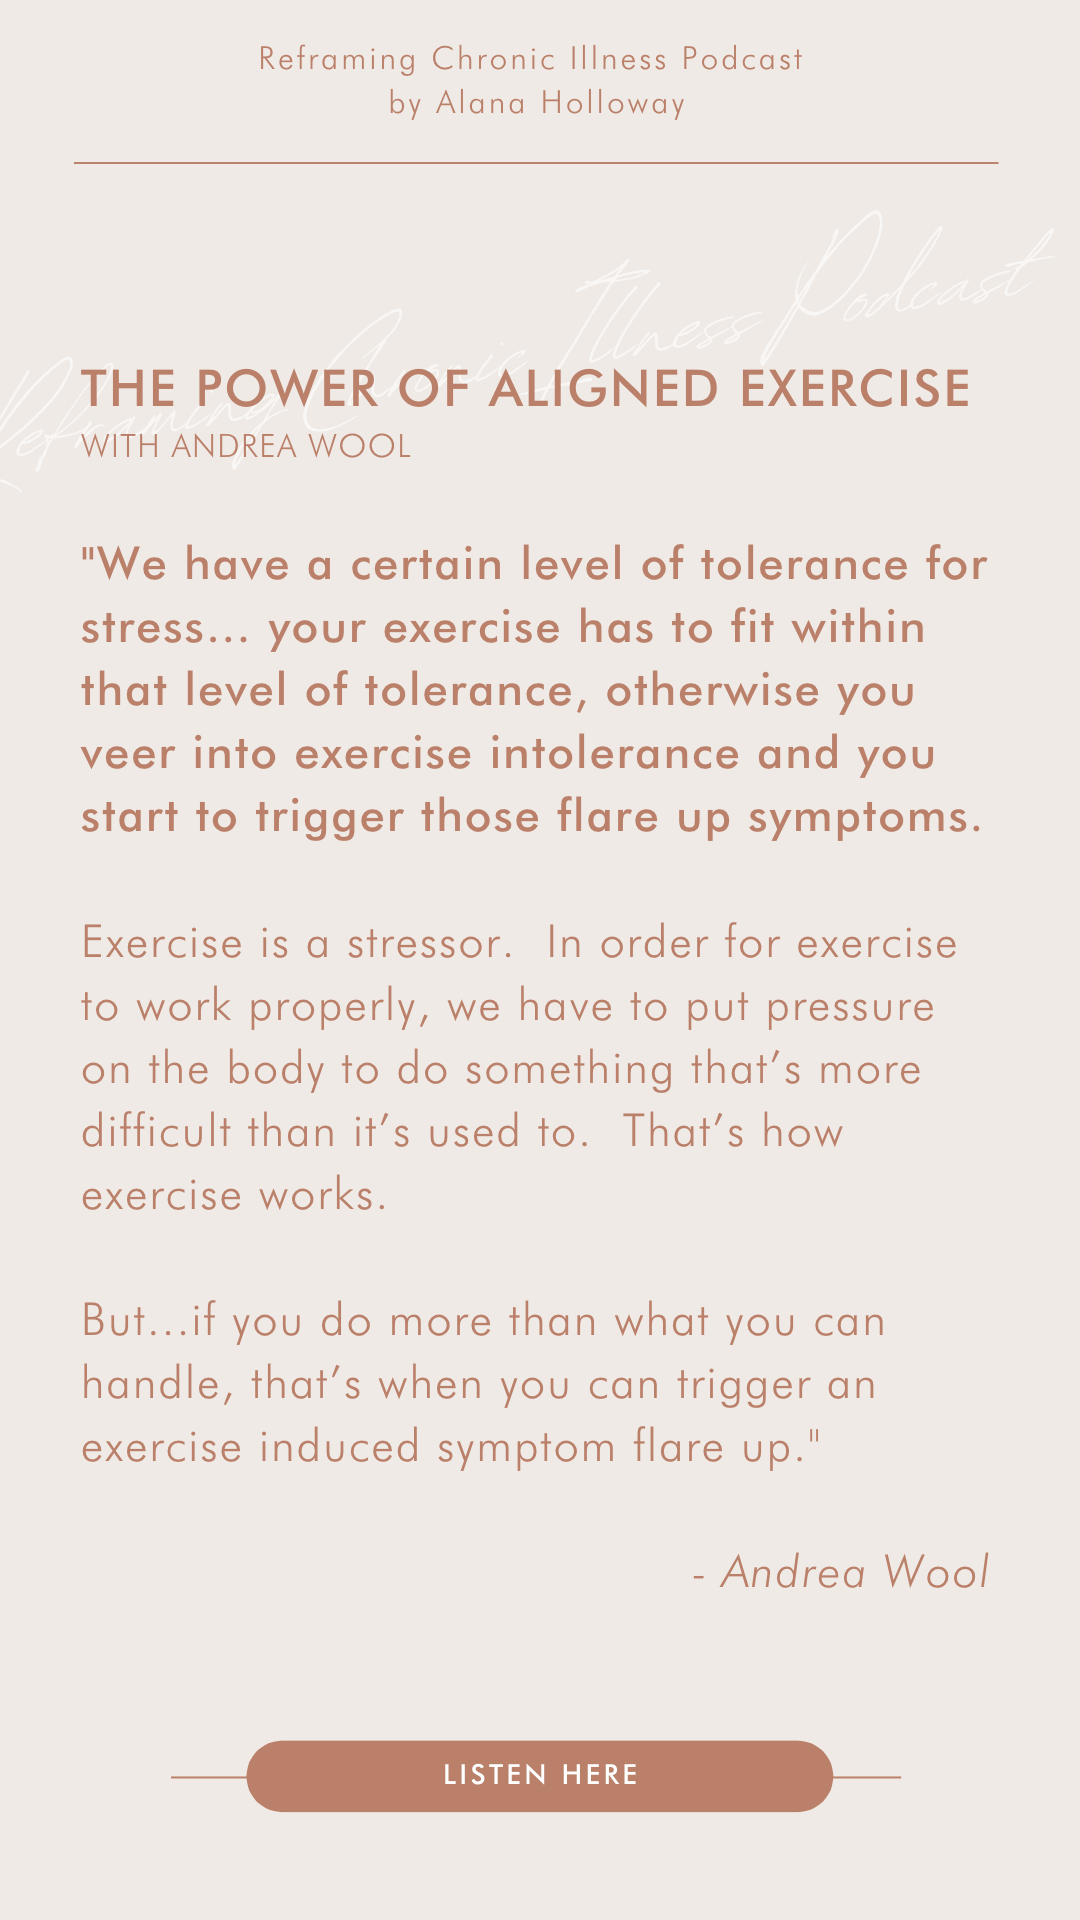 Andrea Wool Autoimmune Strong - Alana Holloway Chronic Illness Coach - Reframing Chronic Illness Podcast - The Power of Aligned Exercise5.png